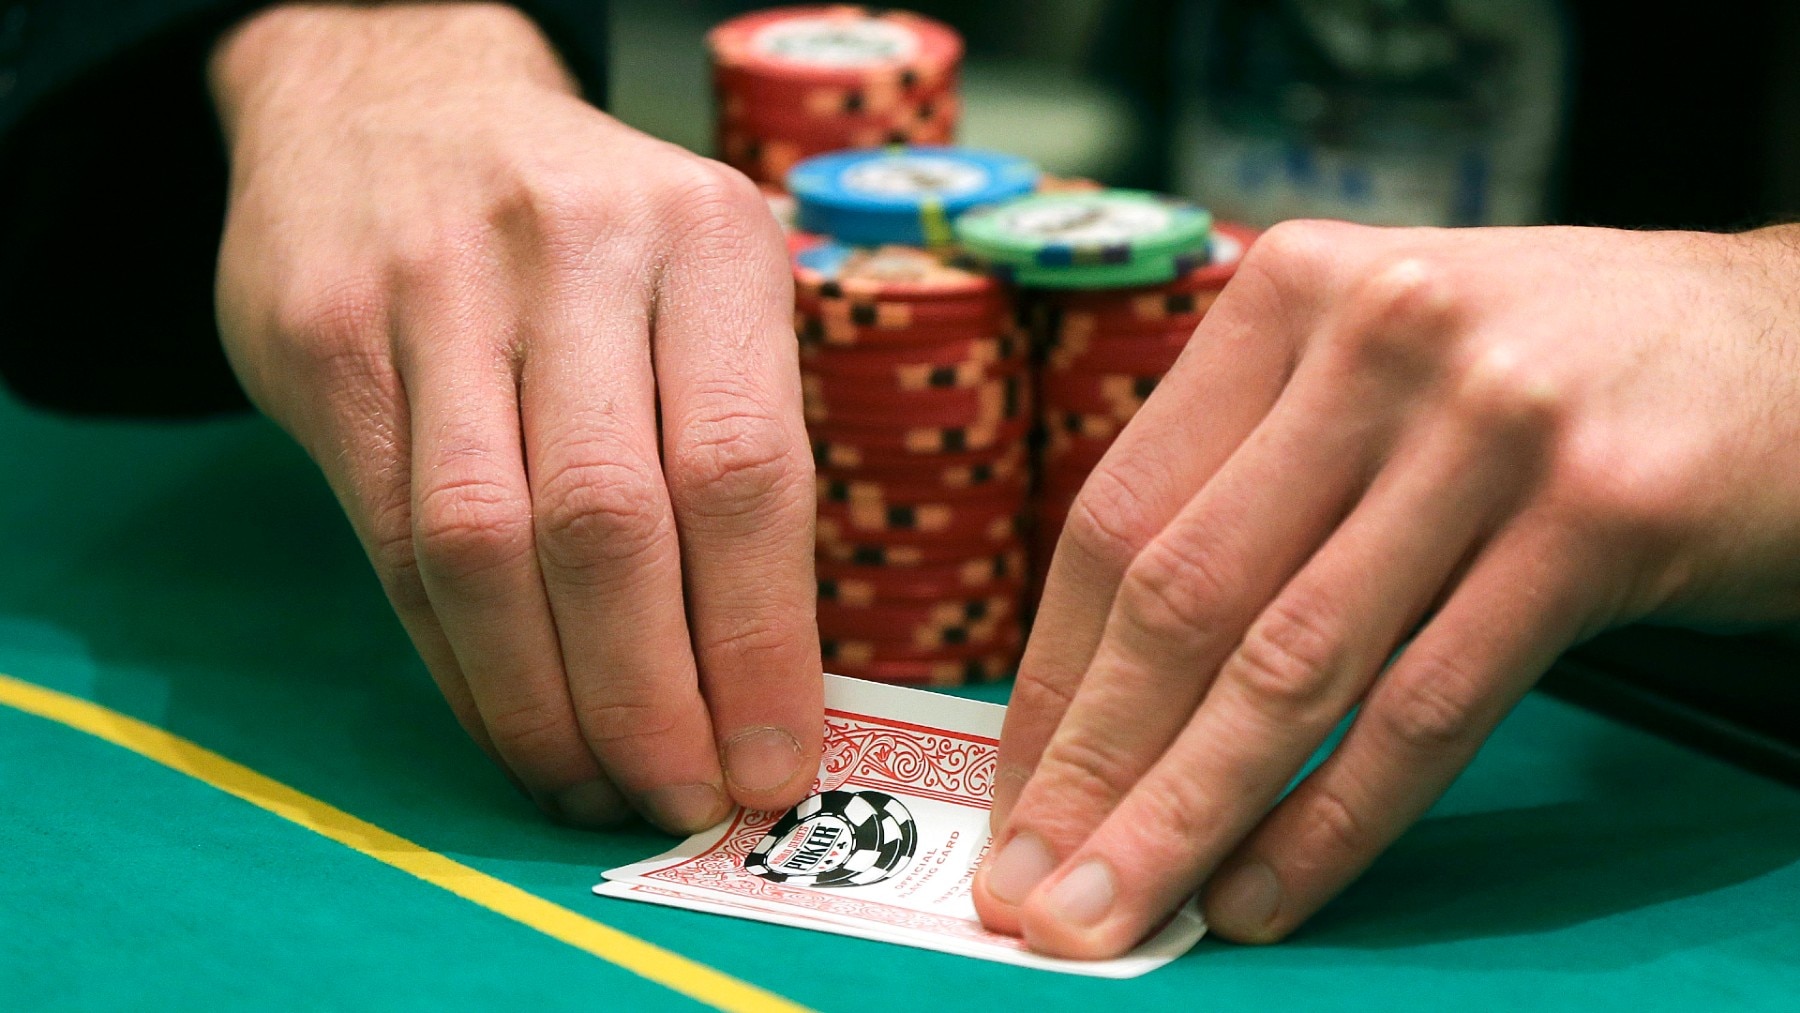 Gambling can lead to addiction with devastating effects 